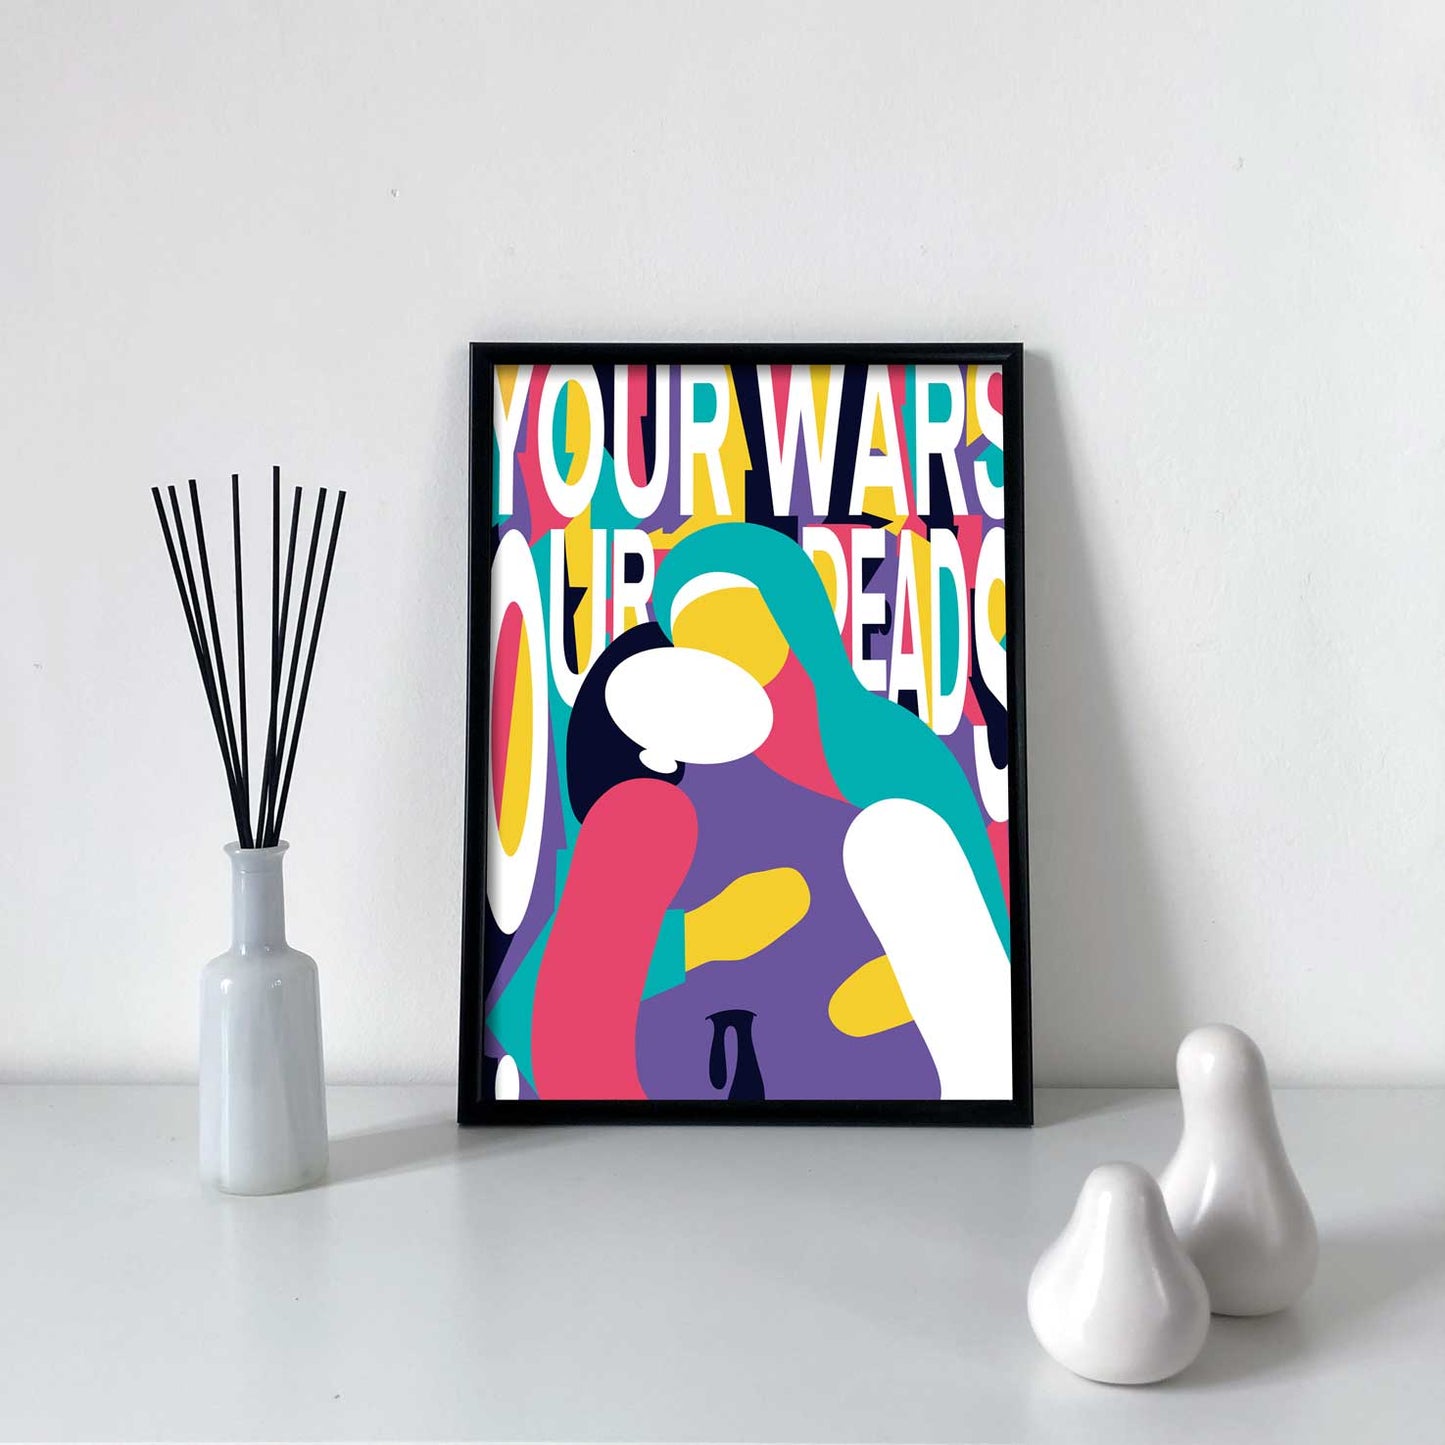 Digital Color Printing - Poster & Urban Art Style: Your wars ours deads